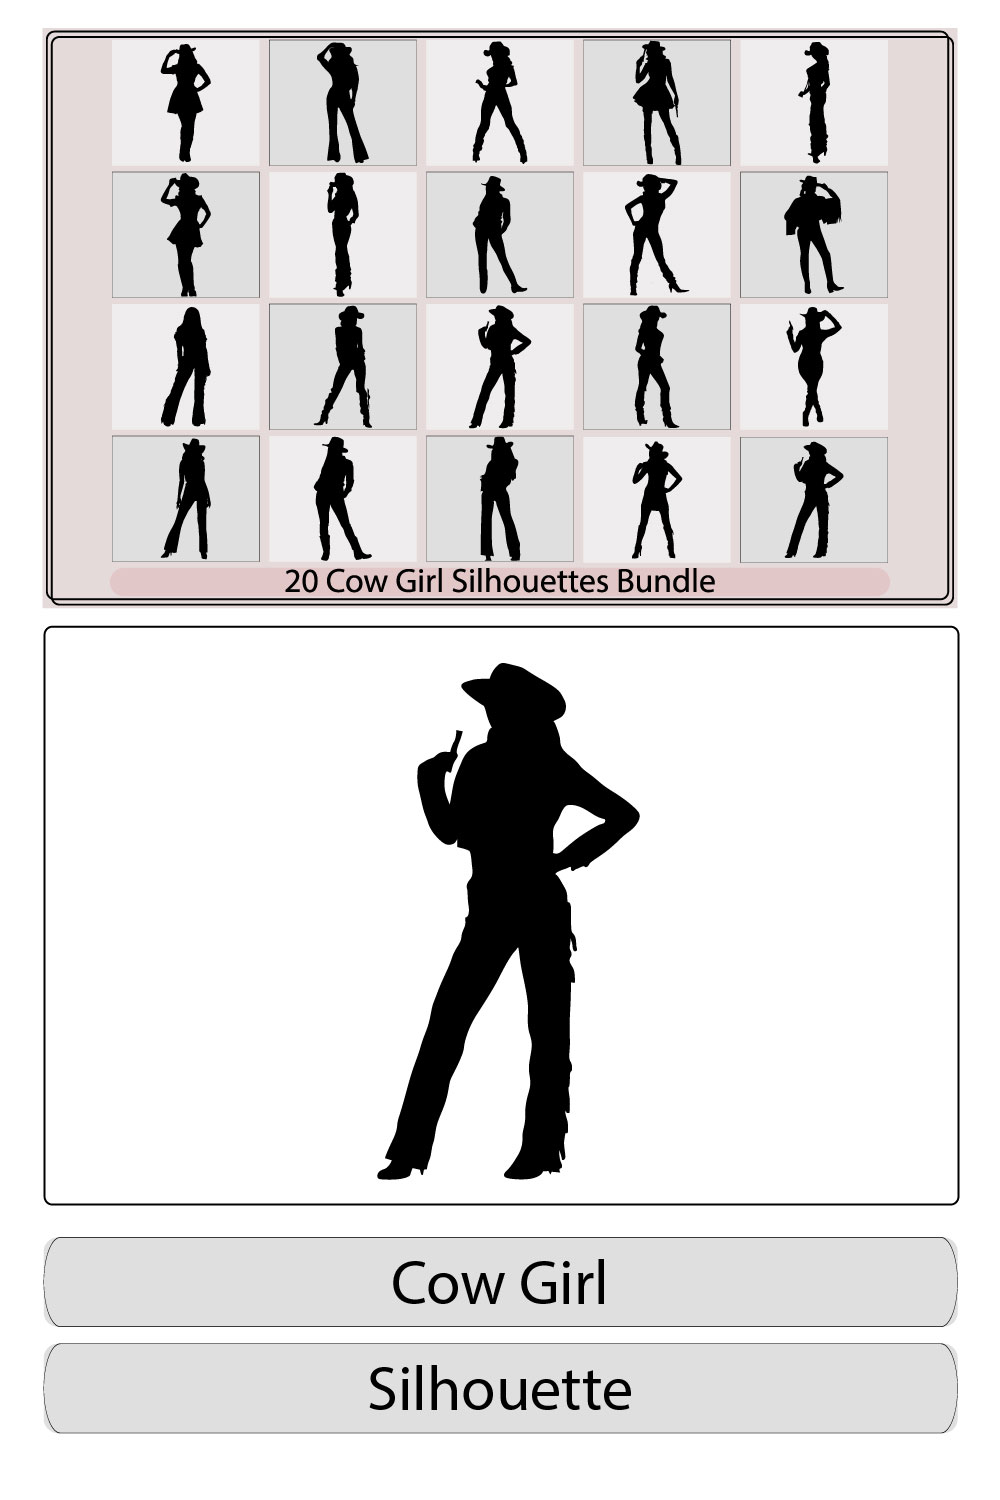 cowgirl riding a horse and throwing lasso,Woman with a cowboy hatwoman cowboy black and white vector silhouette design set pinterest preview image.